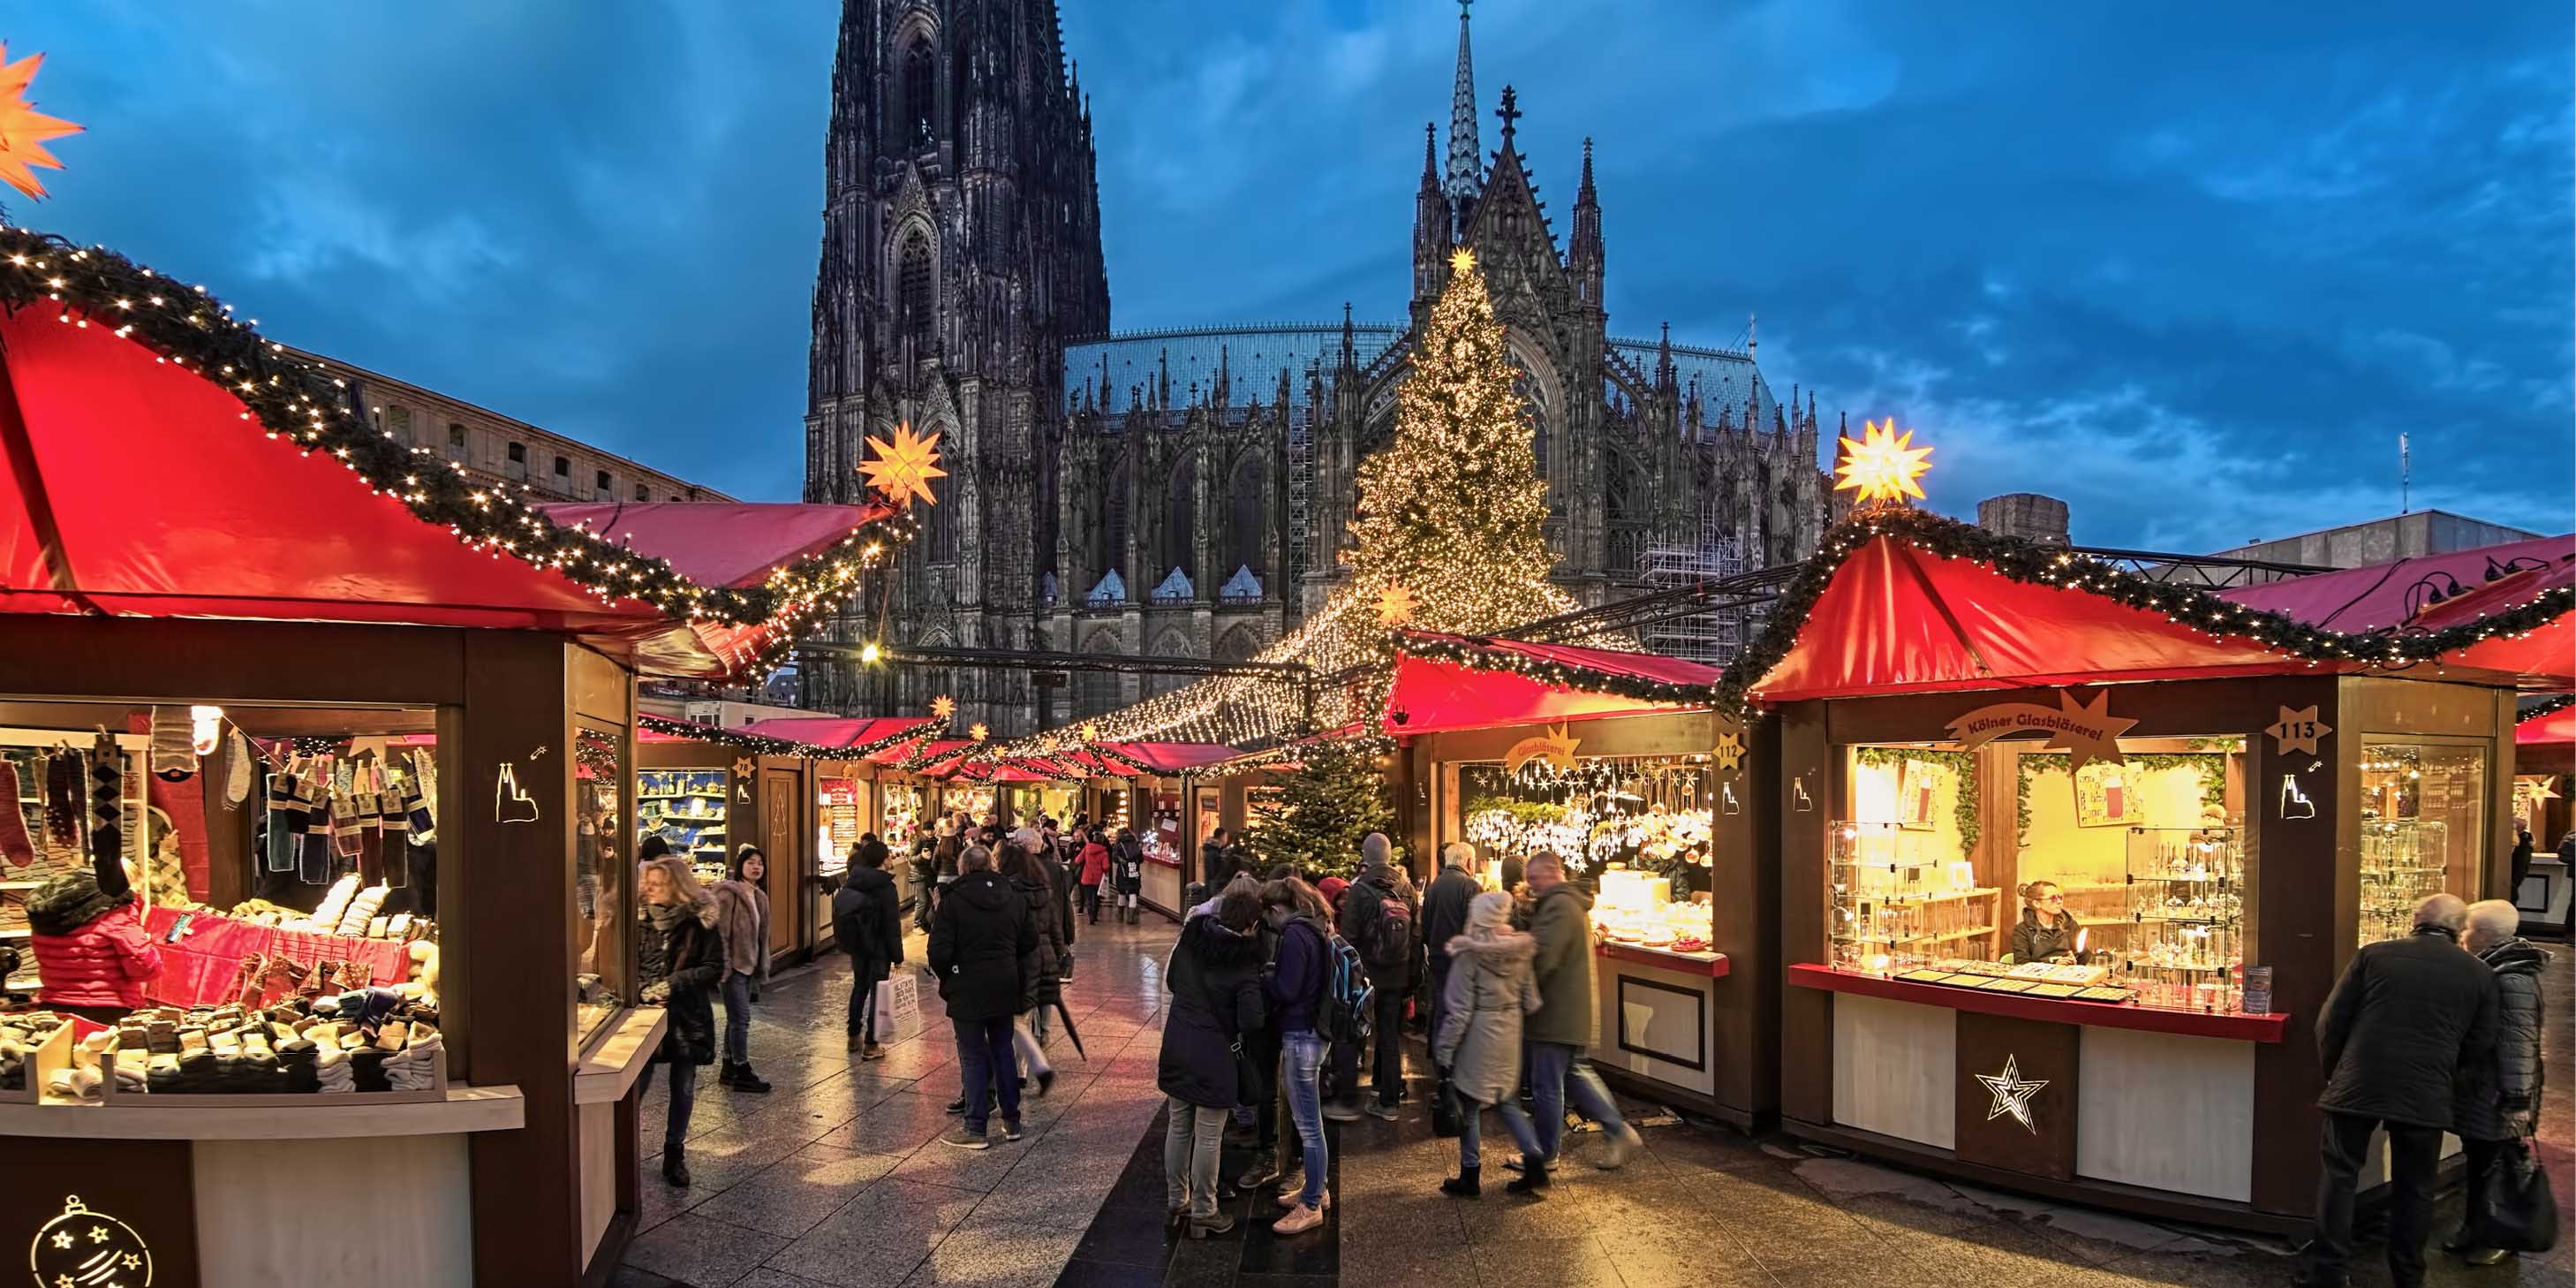  Famous Christmas markets in front of the Cathedral in Cologne, Germany